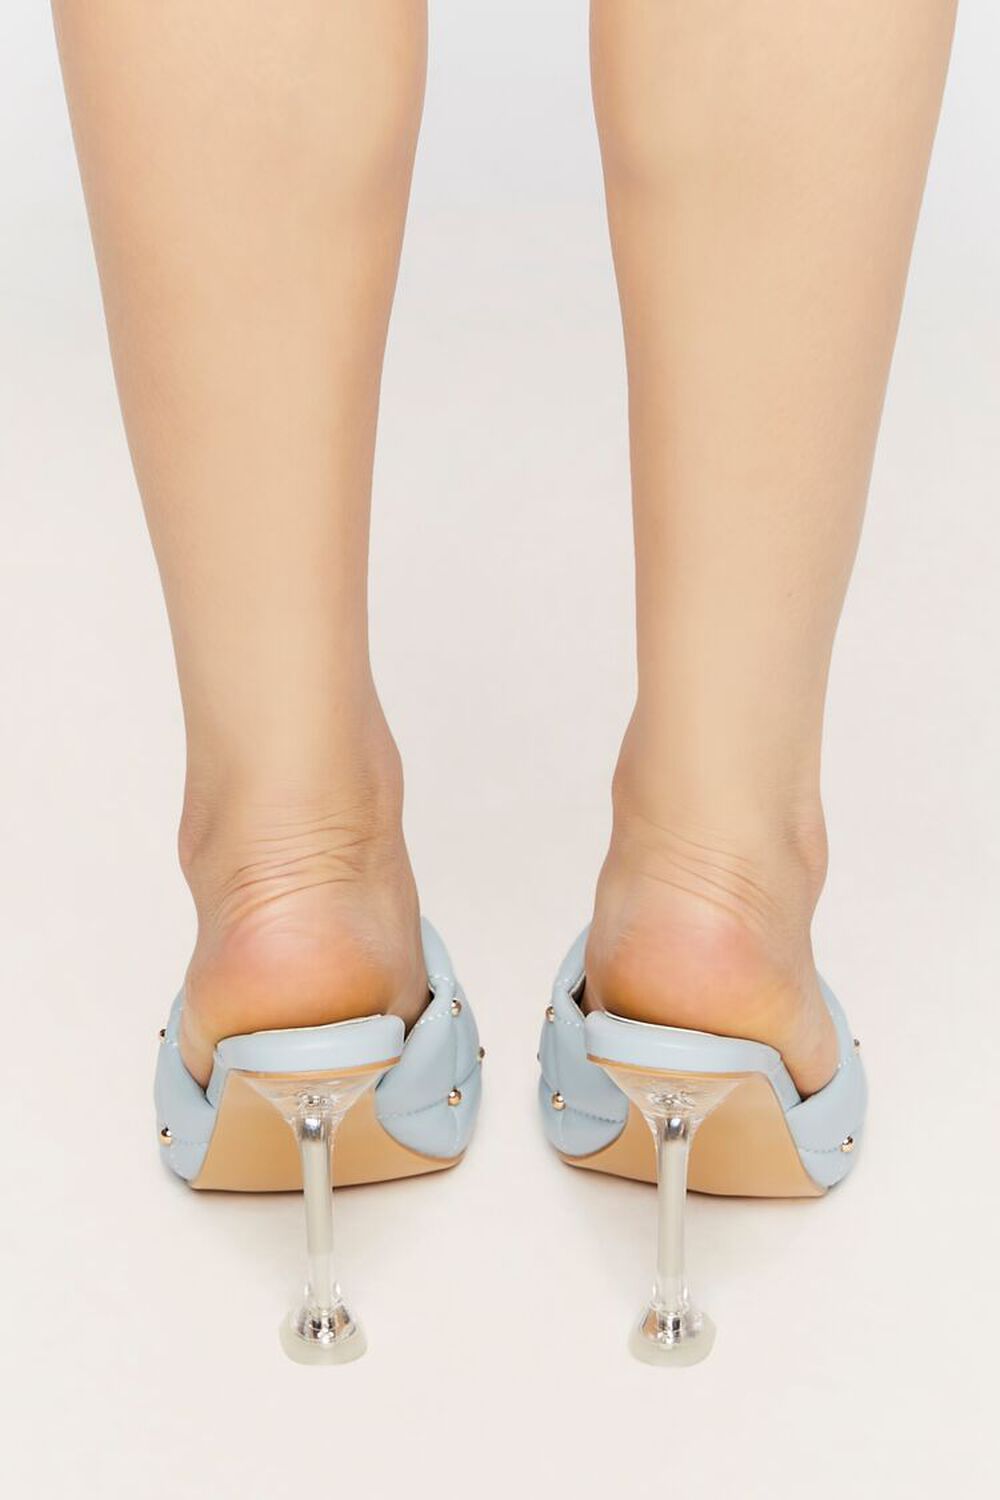 BLUE Quilted Slip-On Heels, image 3